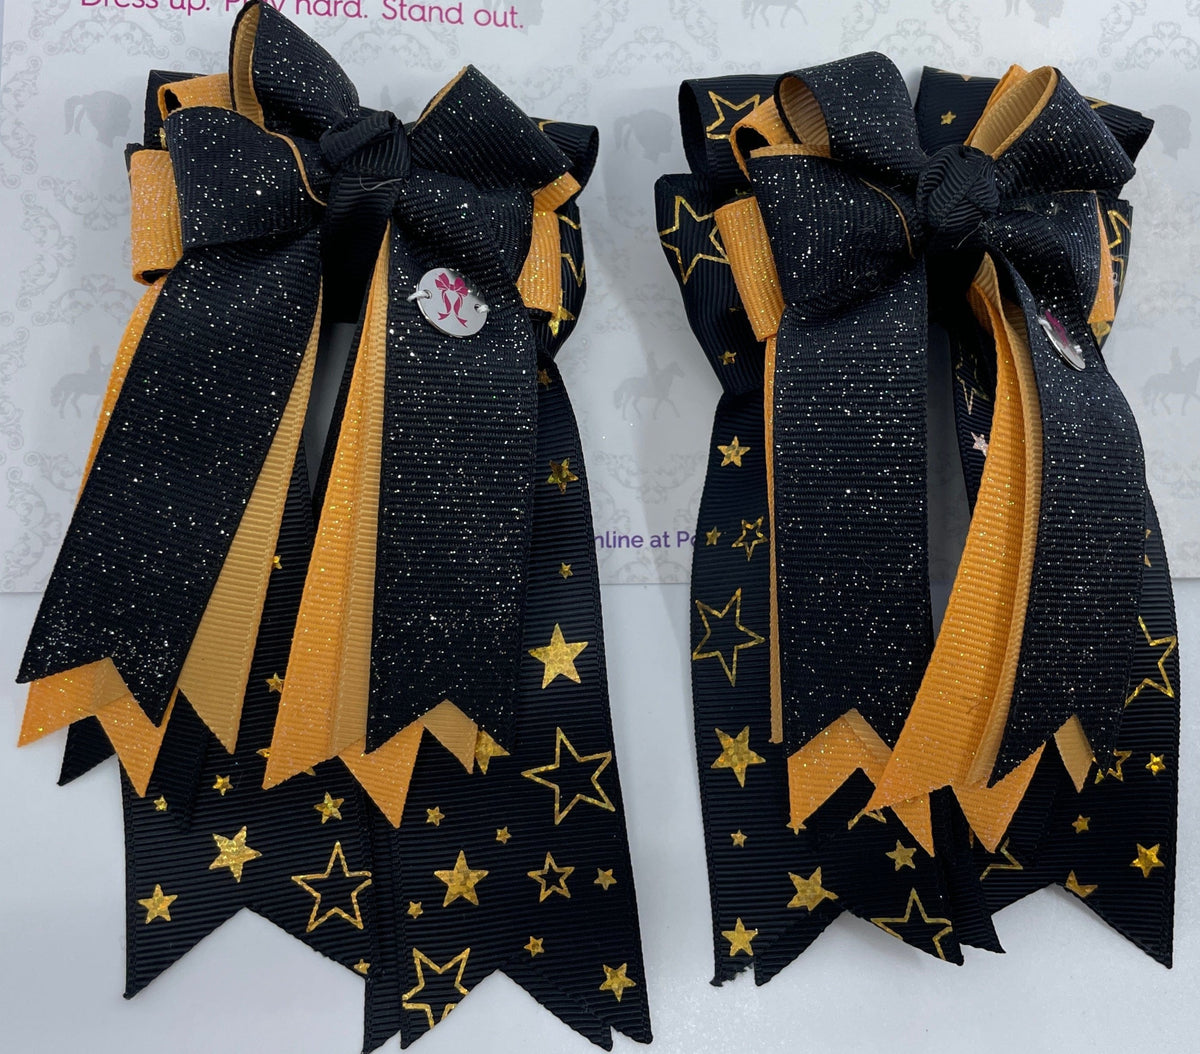 PonyTail Bows 3" Tails Starry Night- Black PonyTail Bows equestrian team apparel online tack store mobile tack store custom farm apparel custom show stable clothing equestrian lifestyle horse show clothing riding clothes PonyTail Bows | Equestrian Hair Accessories horses equestrian tack store